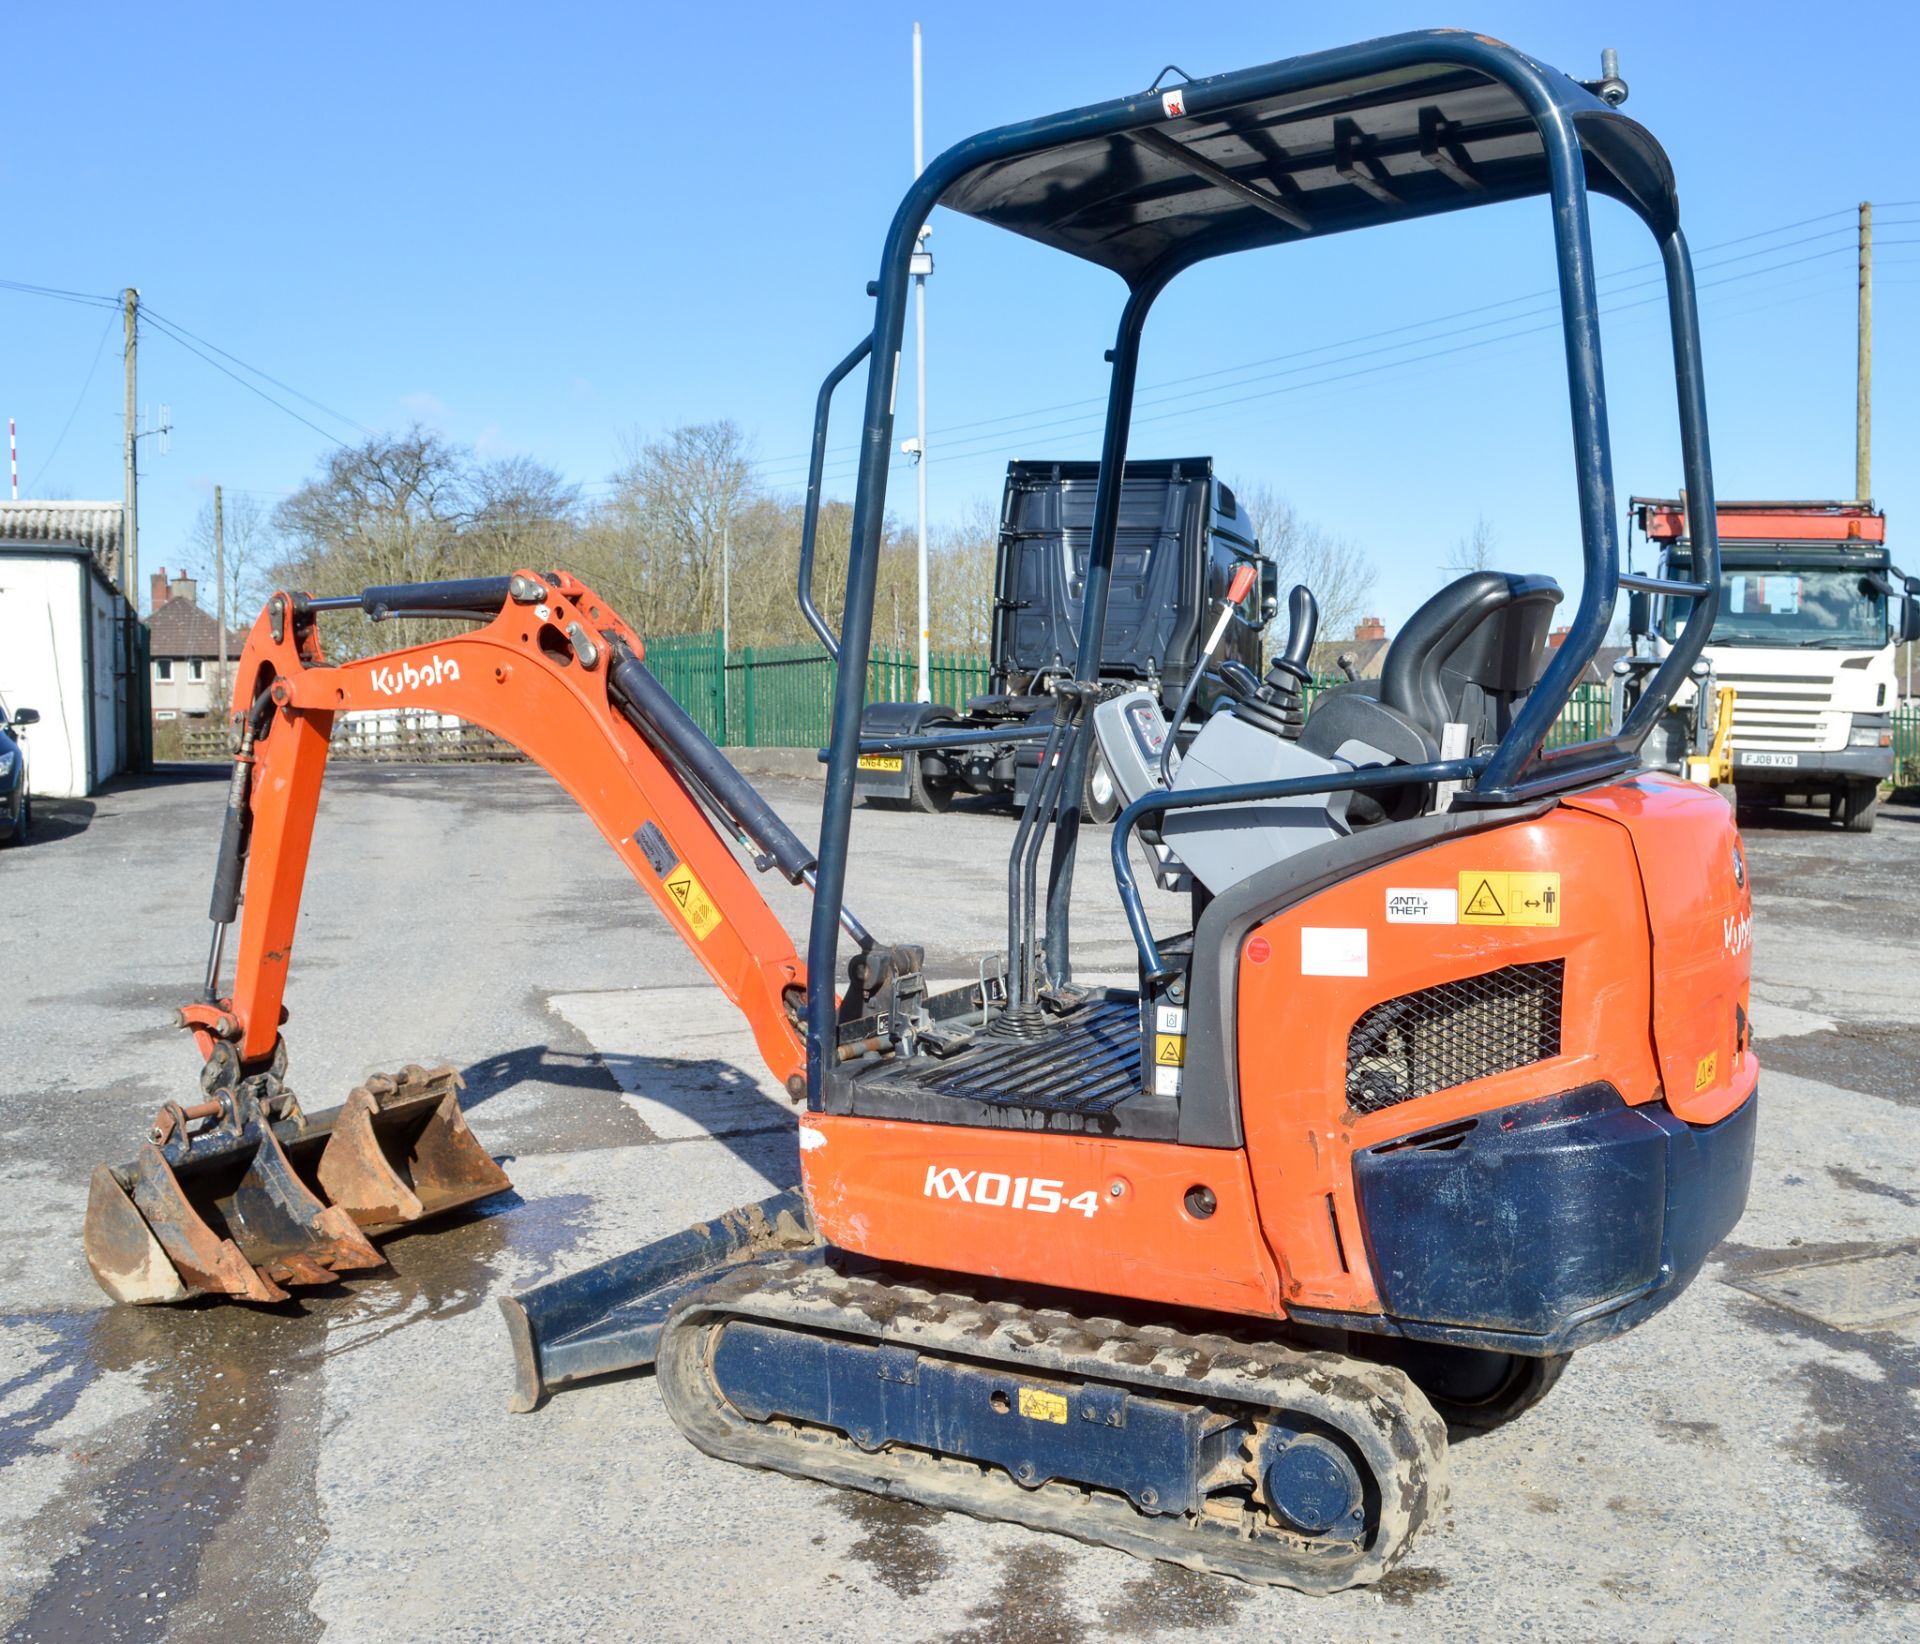 Kubota KX015.4 1.5 tonne rubber tracked excavator Year: 2015 S/N: 59007 Recorded Hours: 1059 - Image 2 of 10